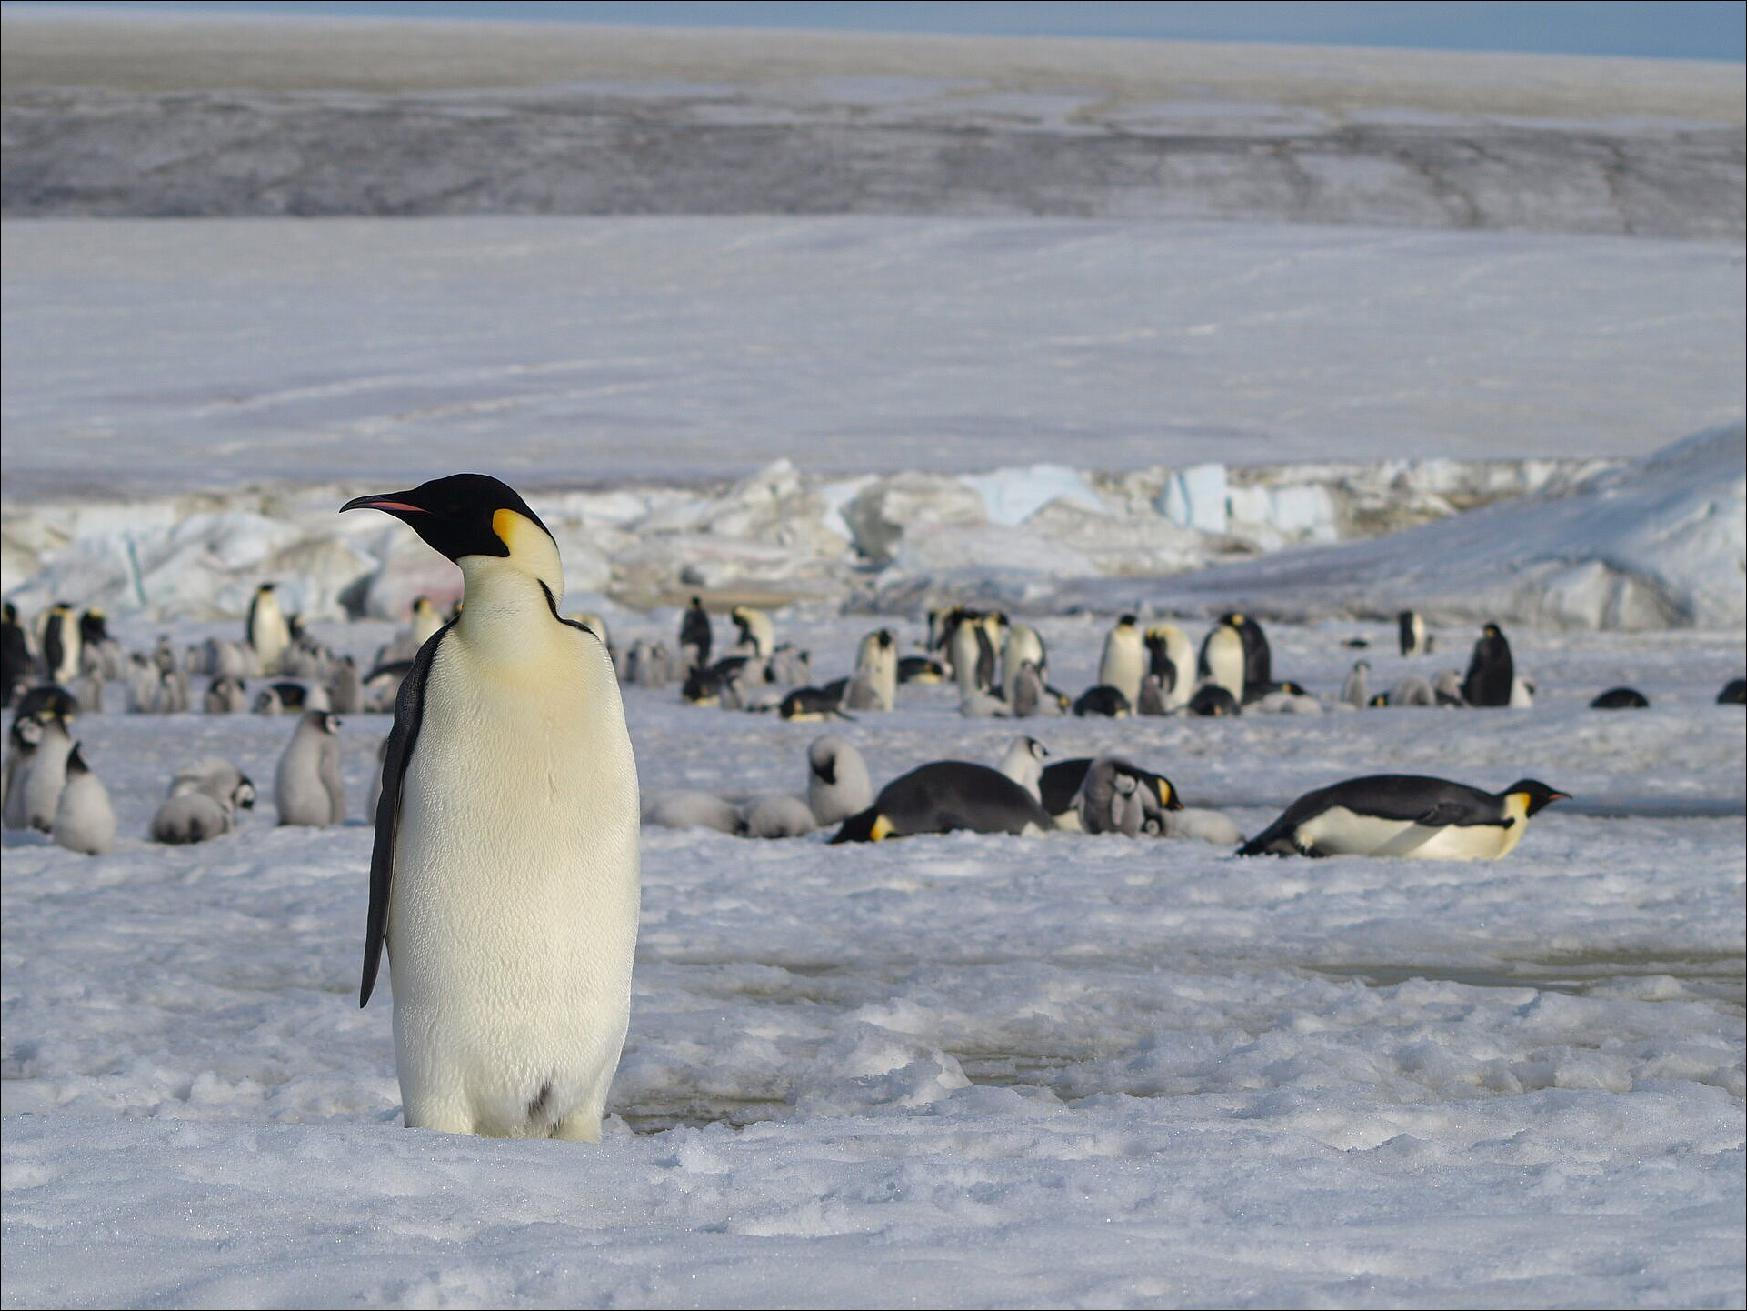 Figure 24: Emperor penguins live in Antarctica, which is not only remote and inaccessible, but temperatures can drop to –50ºC. Studying penguin colonies is therefore extremely difficult. Nevertheless, over the last 10 years, scientists at the British Antarctic Survey (BAS) have been able to search for new emperor penguin colonies using satellite imagery (image credit: BAS)